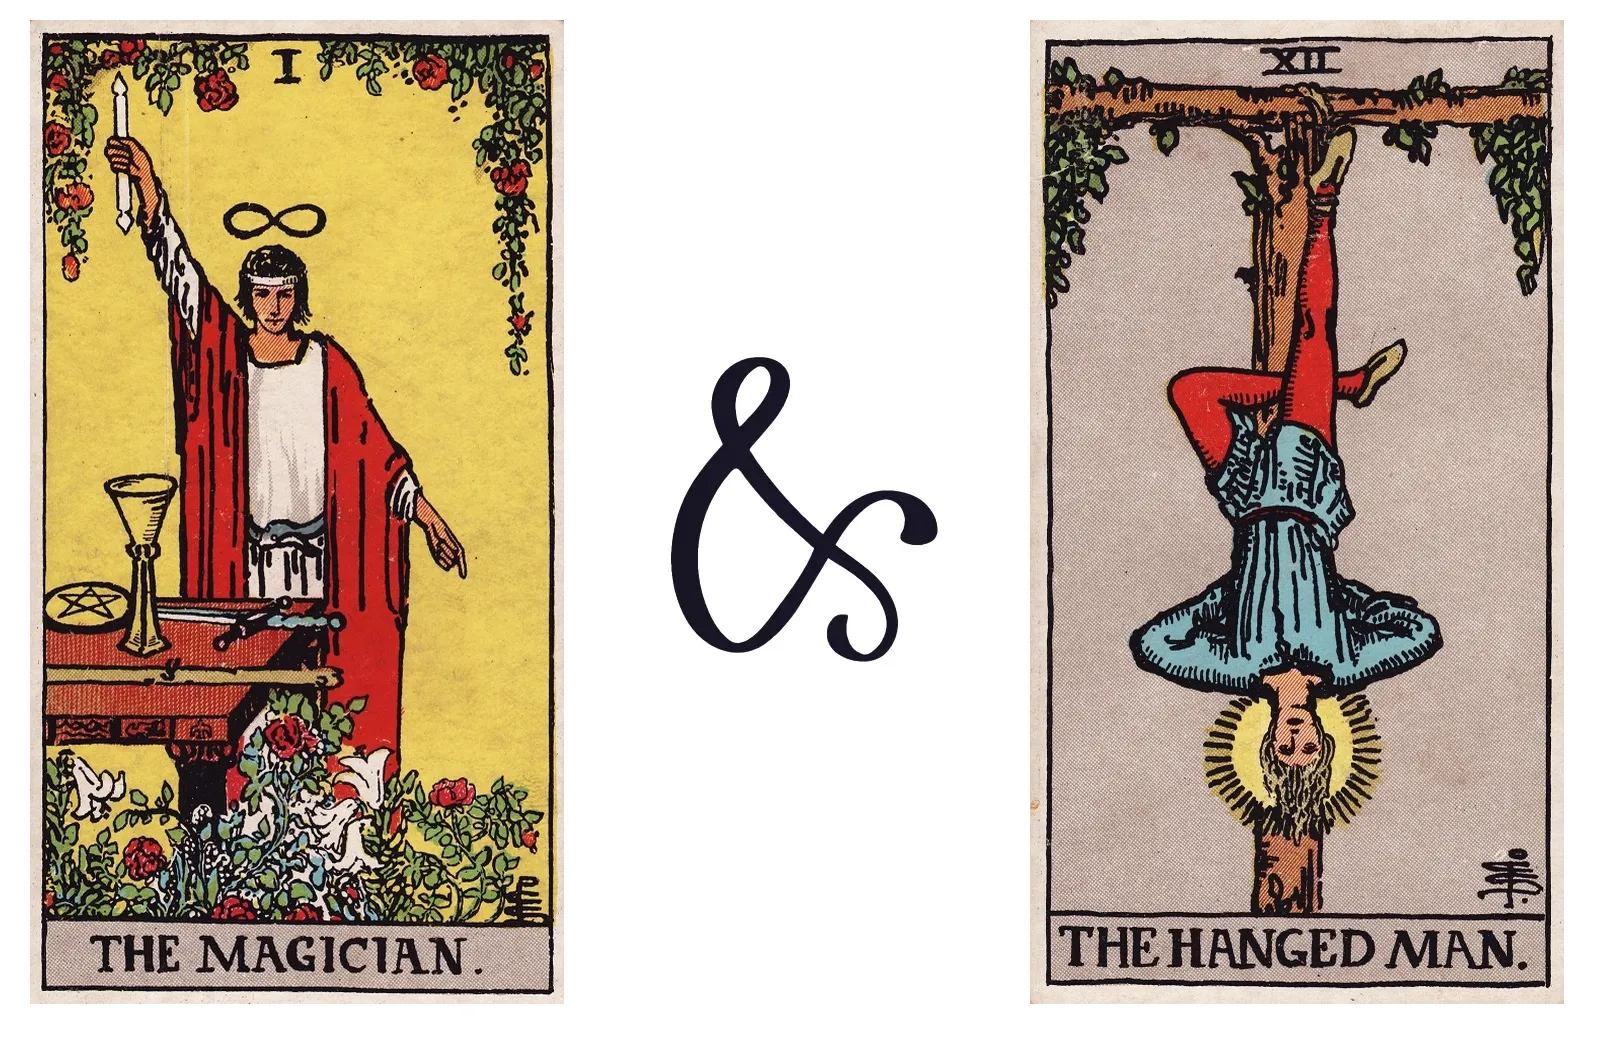 The Magician and The Hanged Man